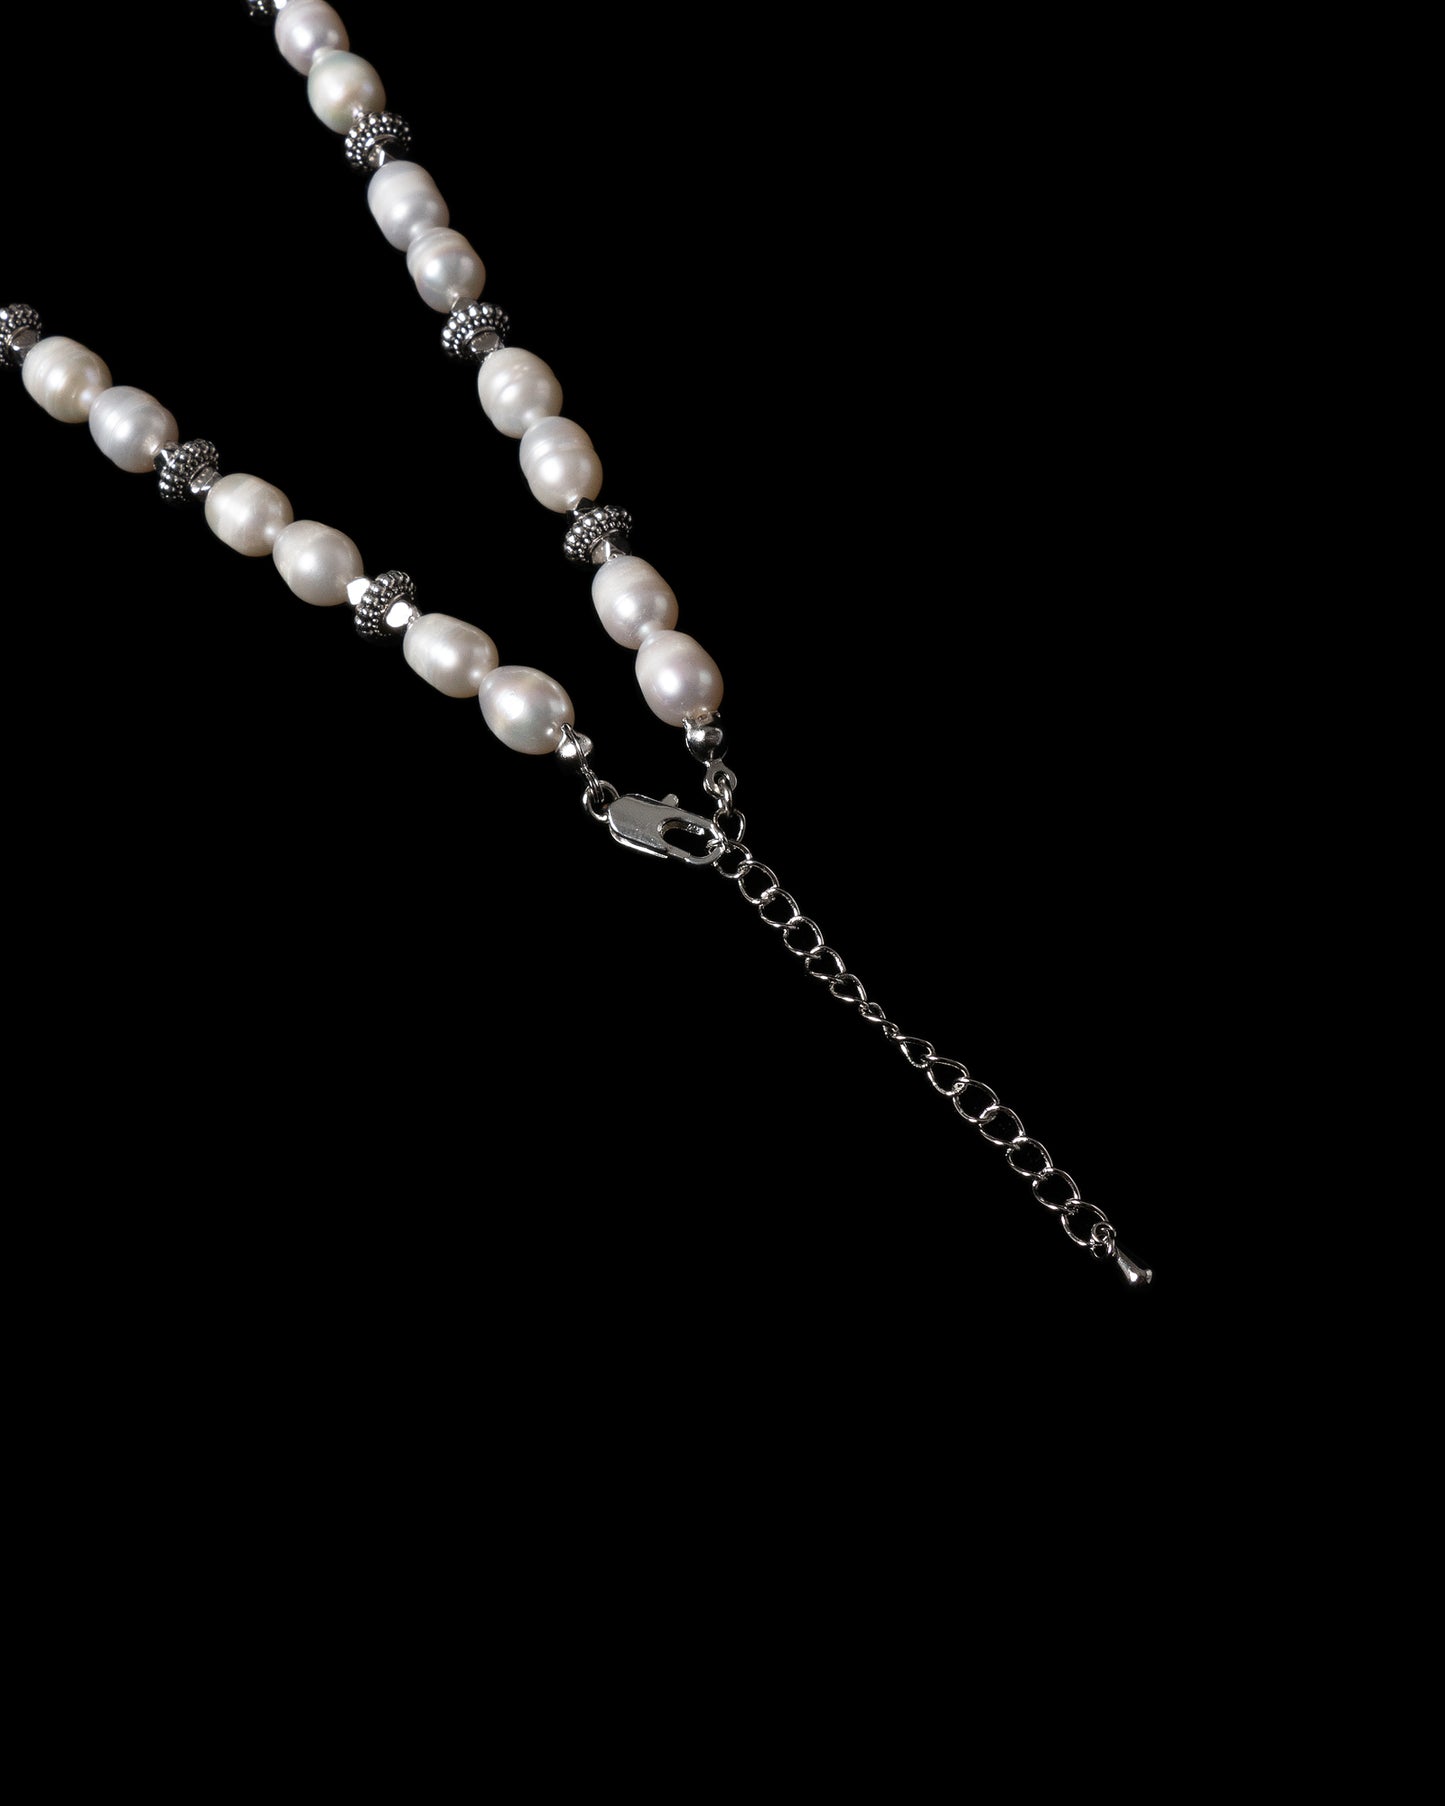 Ridged silver pearl necklace